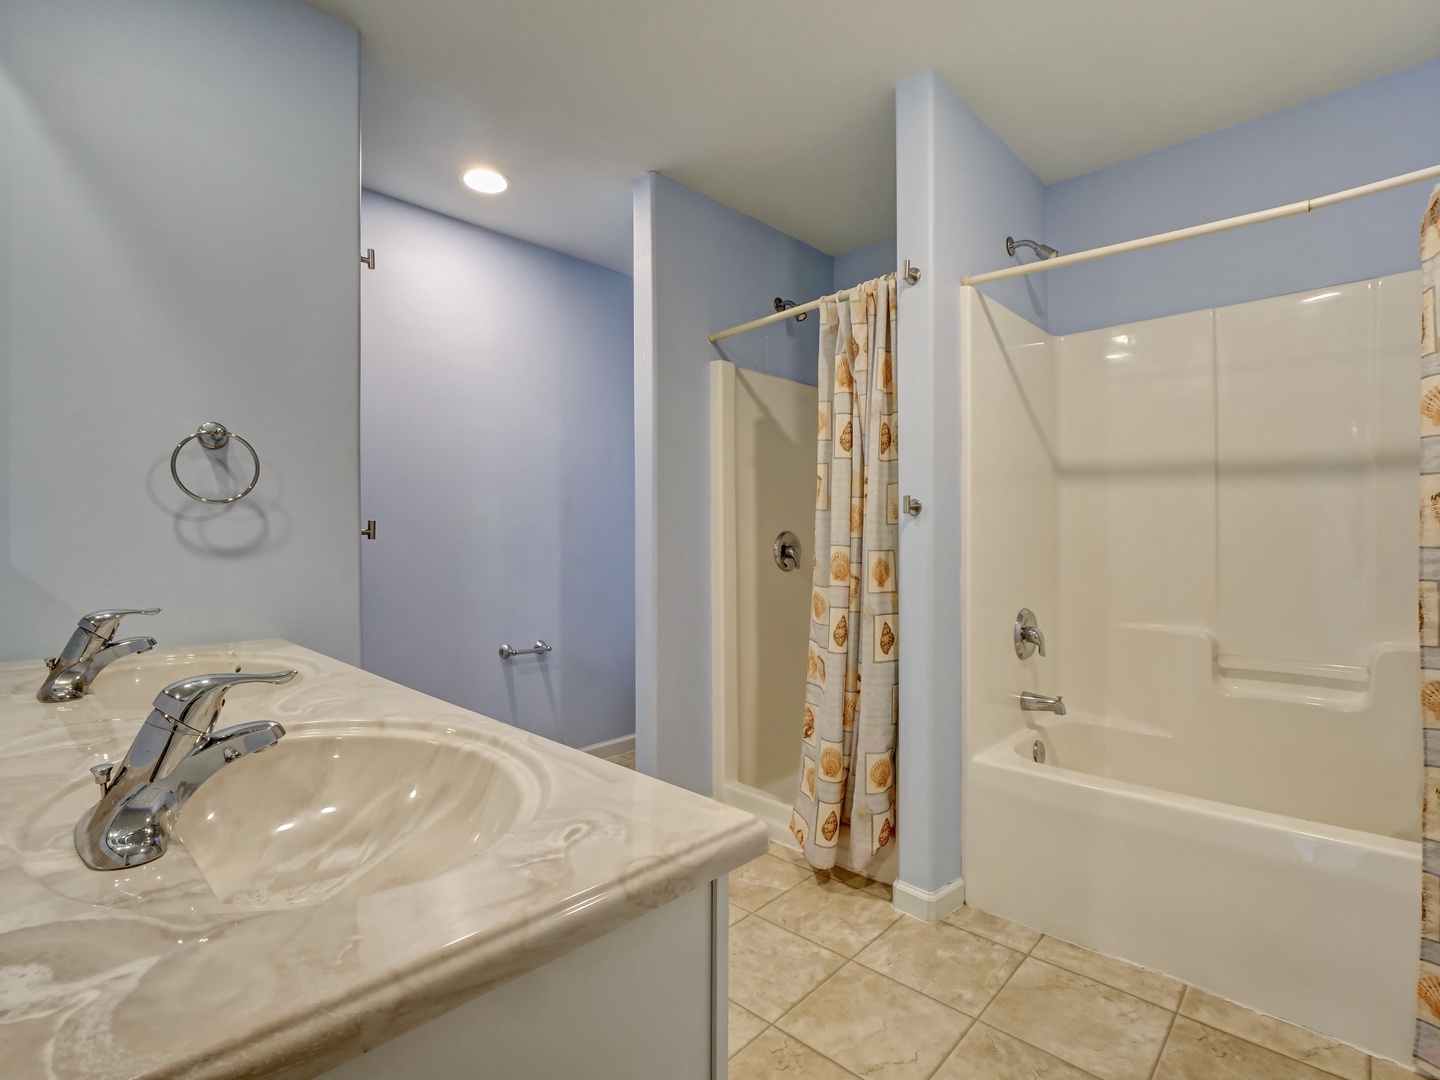 First level shared bathroom with a walk-in shower and shower-tub combination